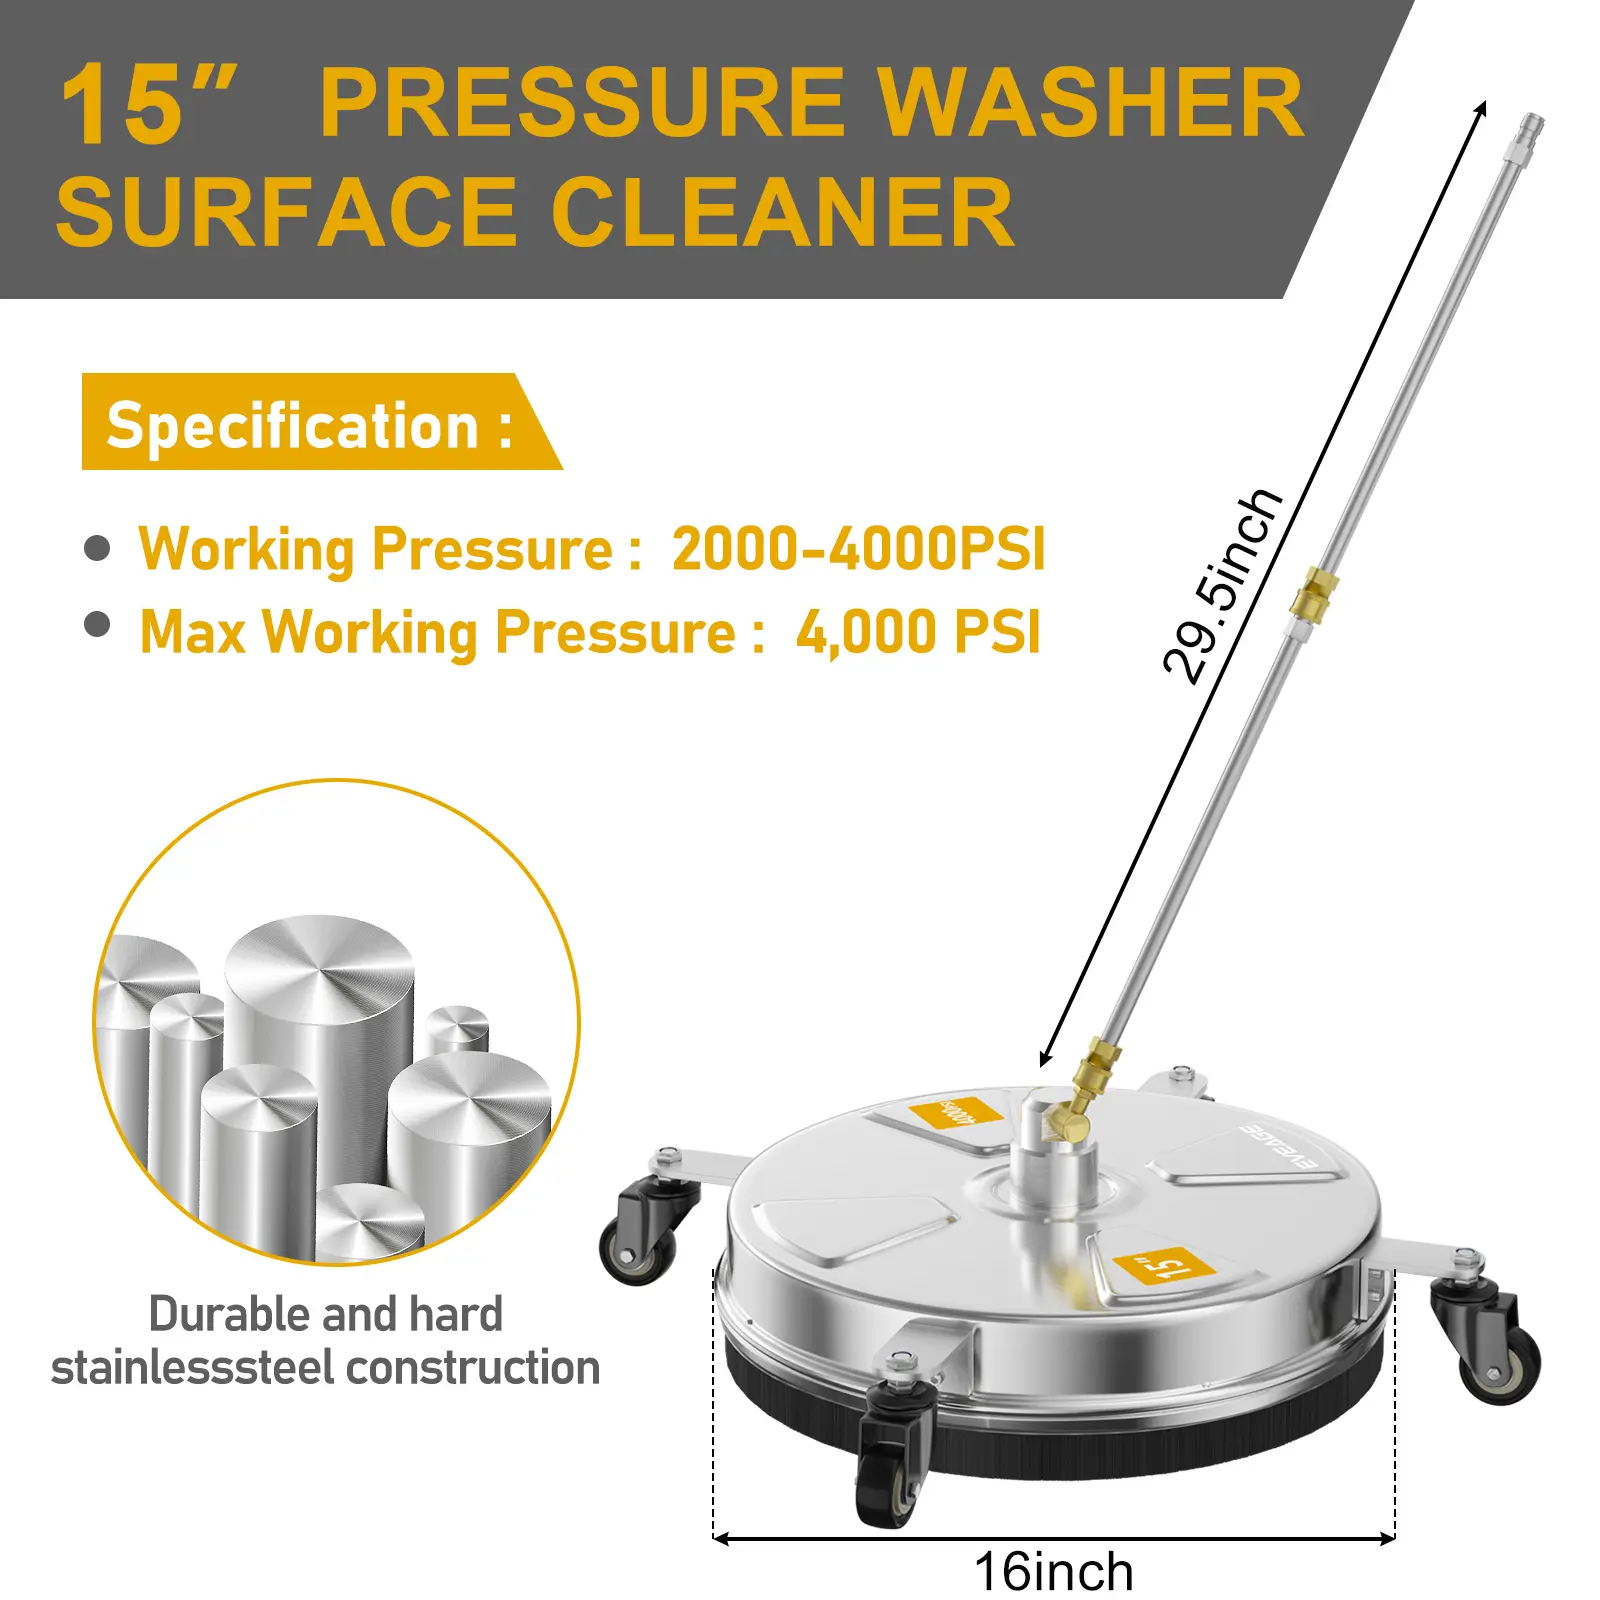 EVEAGE 15″ Pressure Washer Surface Cleaner, Power Washer Surface Cleaner with 4 Wheels, Stainless Steel Housing Power Washer Accessories with 2 Extension Wand, 2 Replacement Nozzles, 4000 PSI